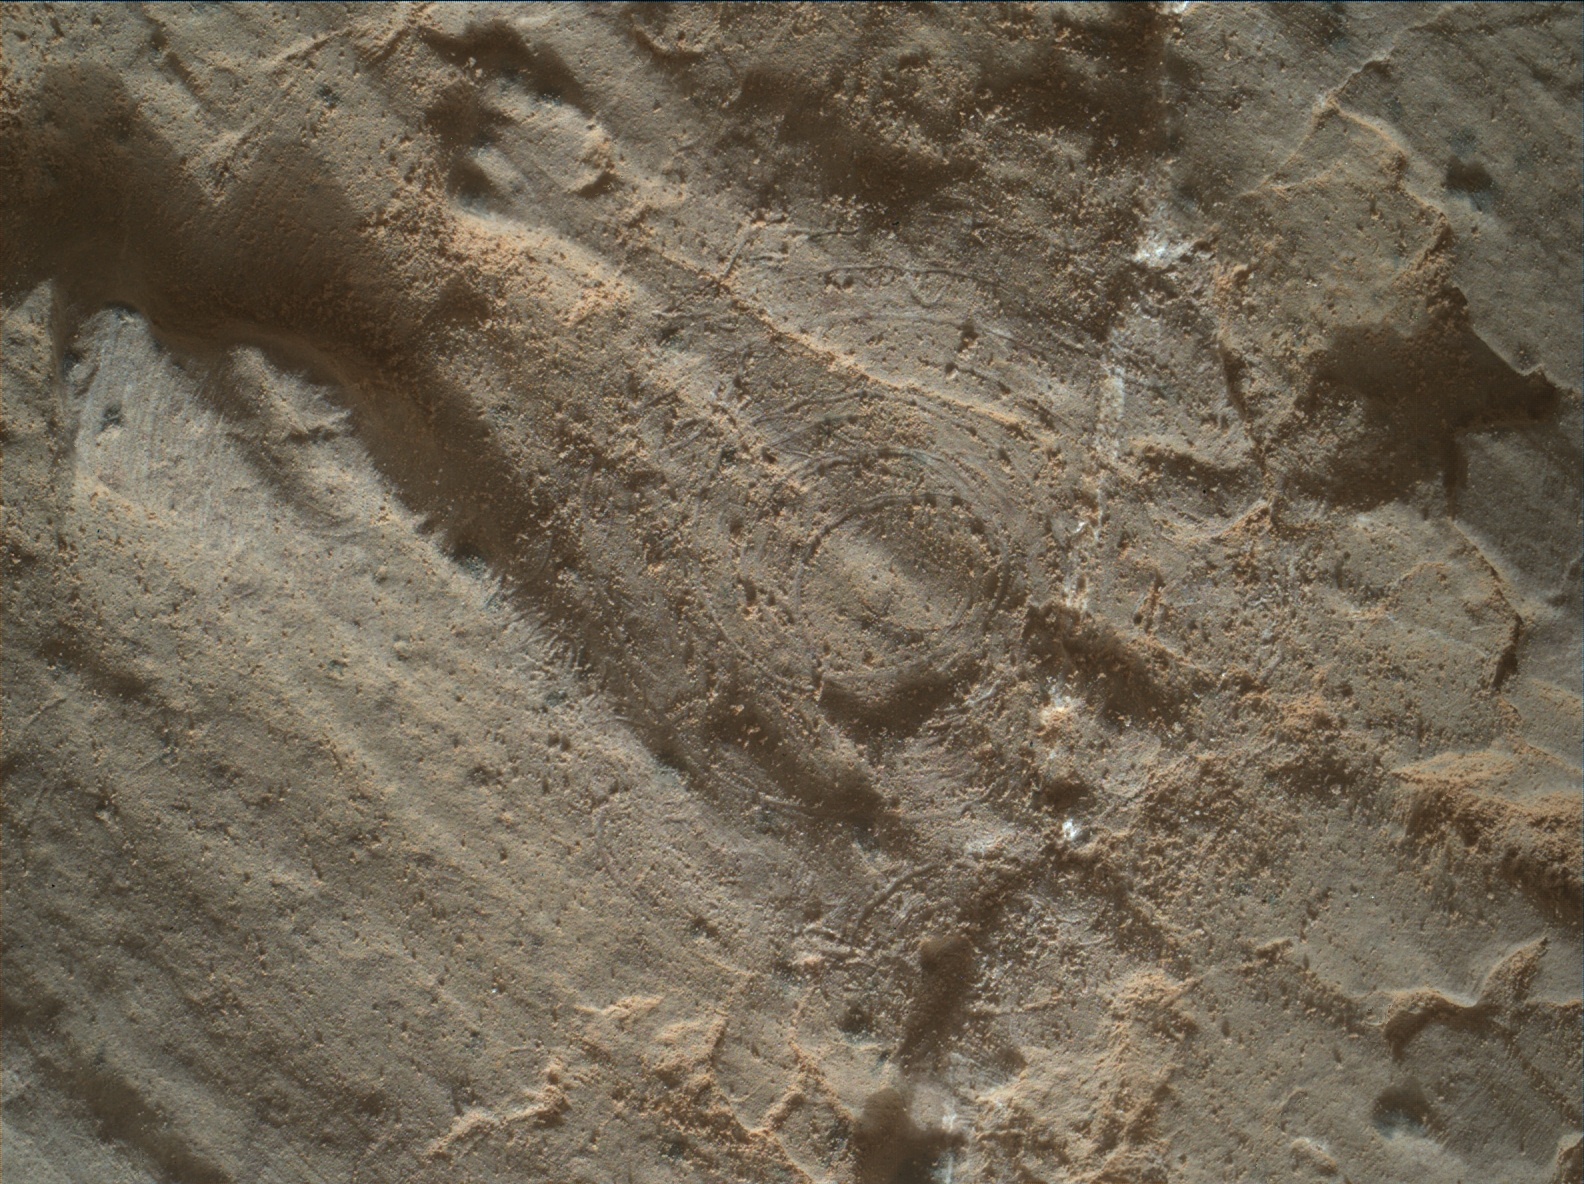 Nasa's Mars rover Curiosity acquired this image using its Mars Hand Lens Imager (MAHLI) on Sol 2657